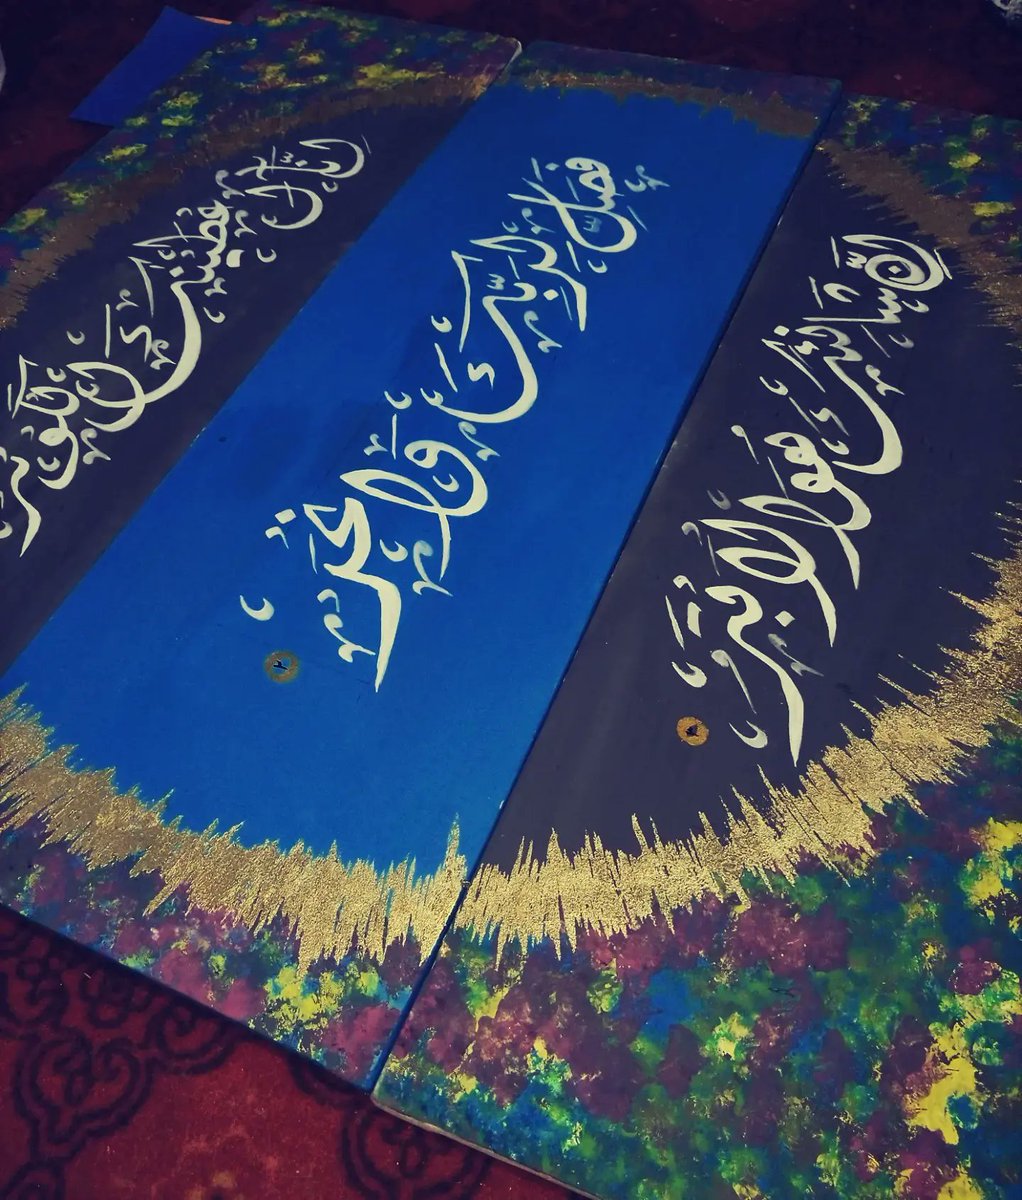 Medium
Aclyric and gold leaf on canvas
Size of each
3by3ft
Theme
Sura al koser

Available
Dm for details 
#paintingoftheday #gray #blue #goldleafart #availablenow